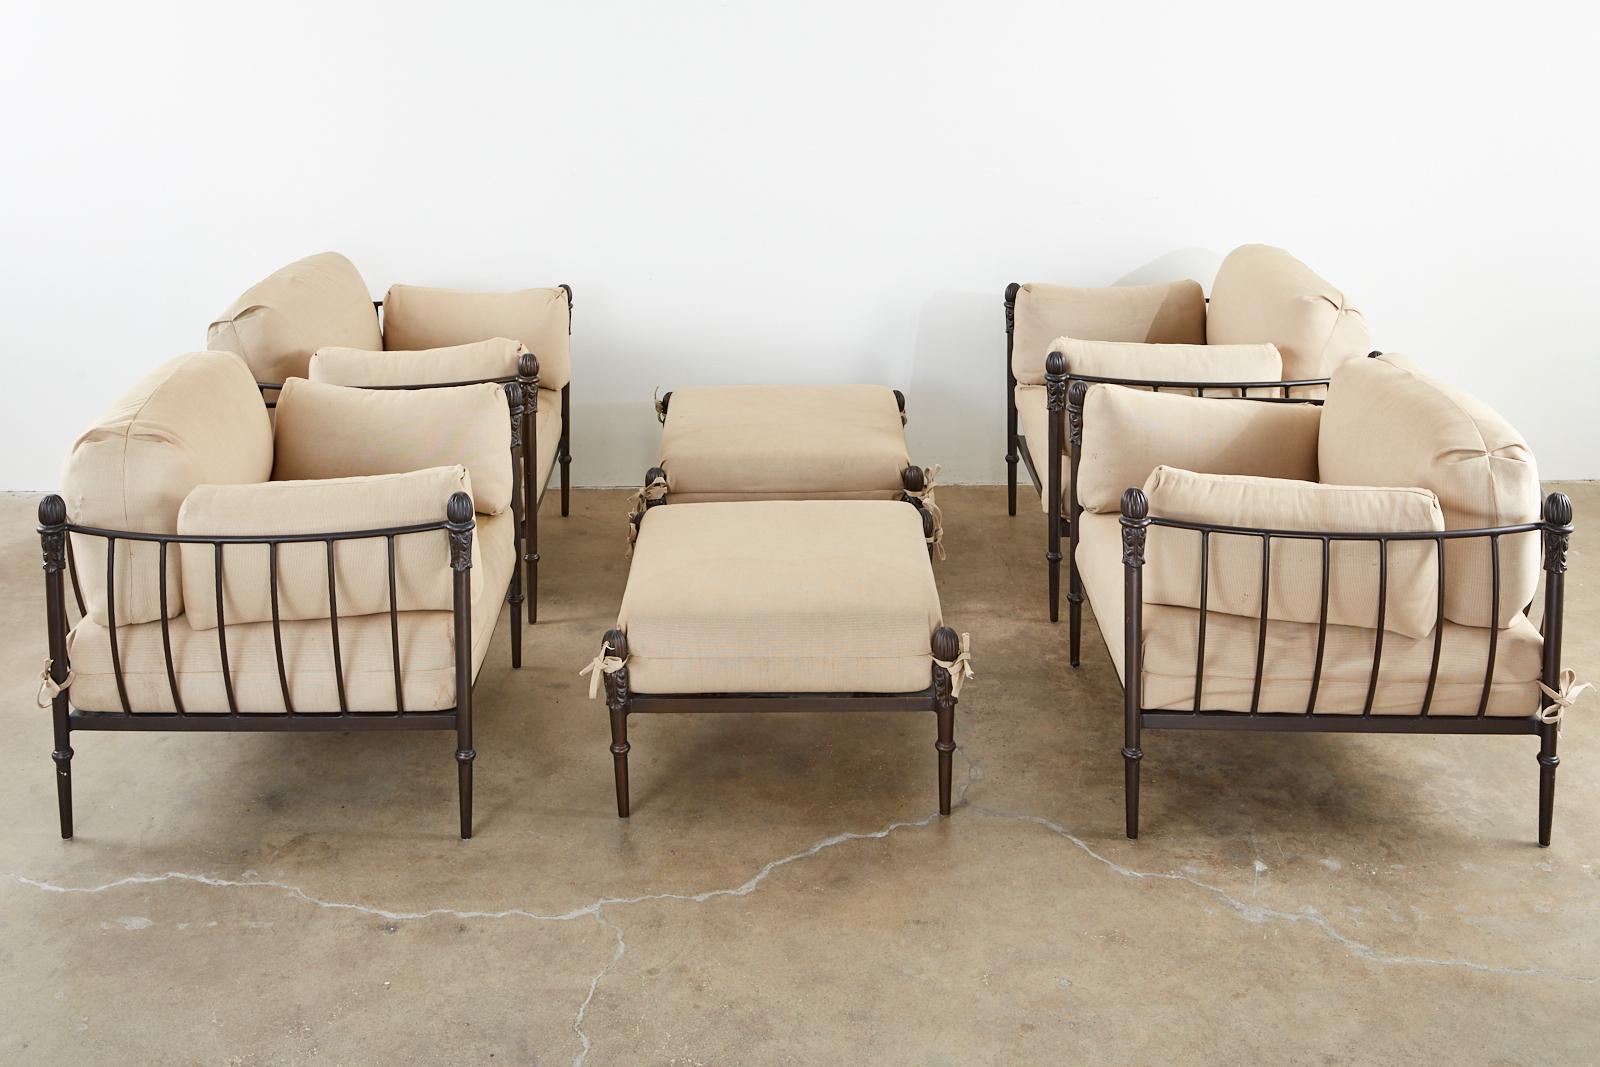 Stately set of four oversized lounge chairs and two ottomans constructed from bronzed solid aluminum. Designed by Michael Taylor from his Montecito line of 